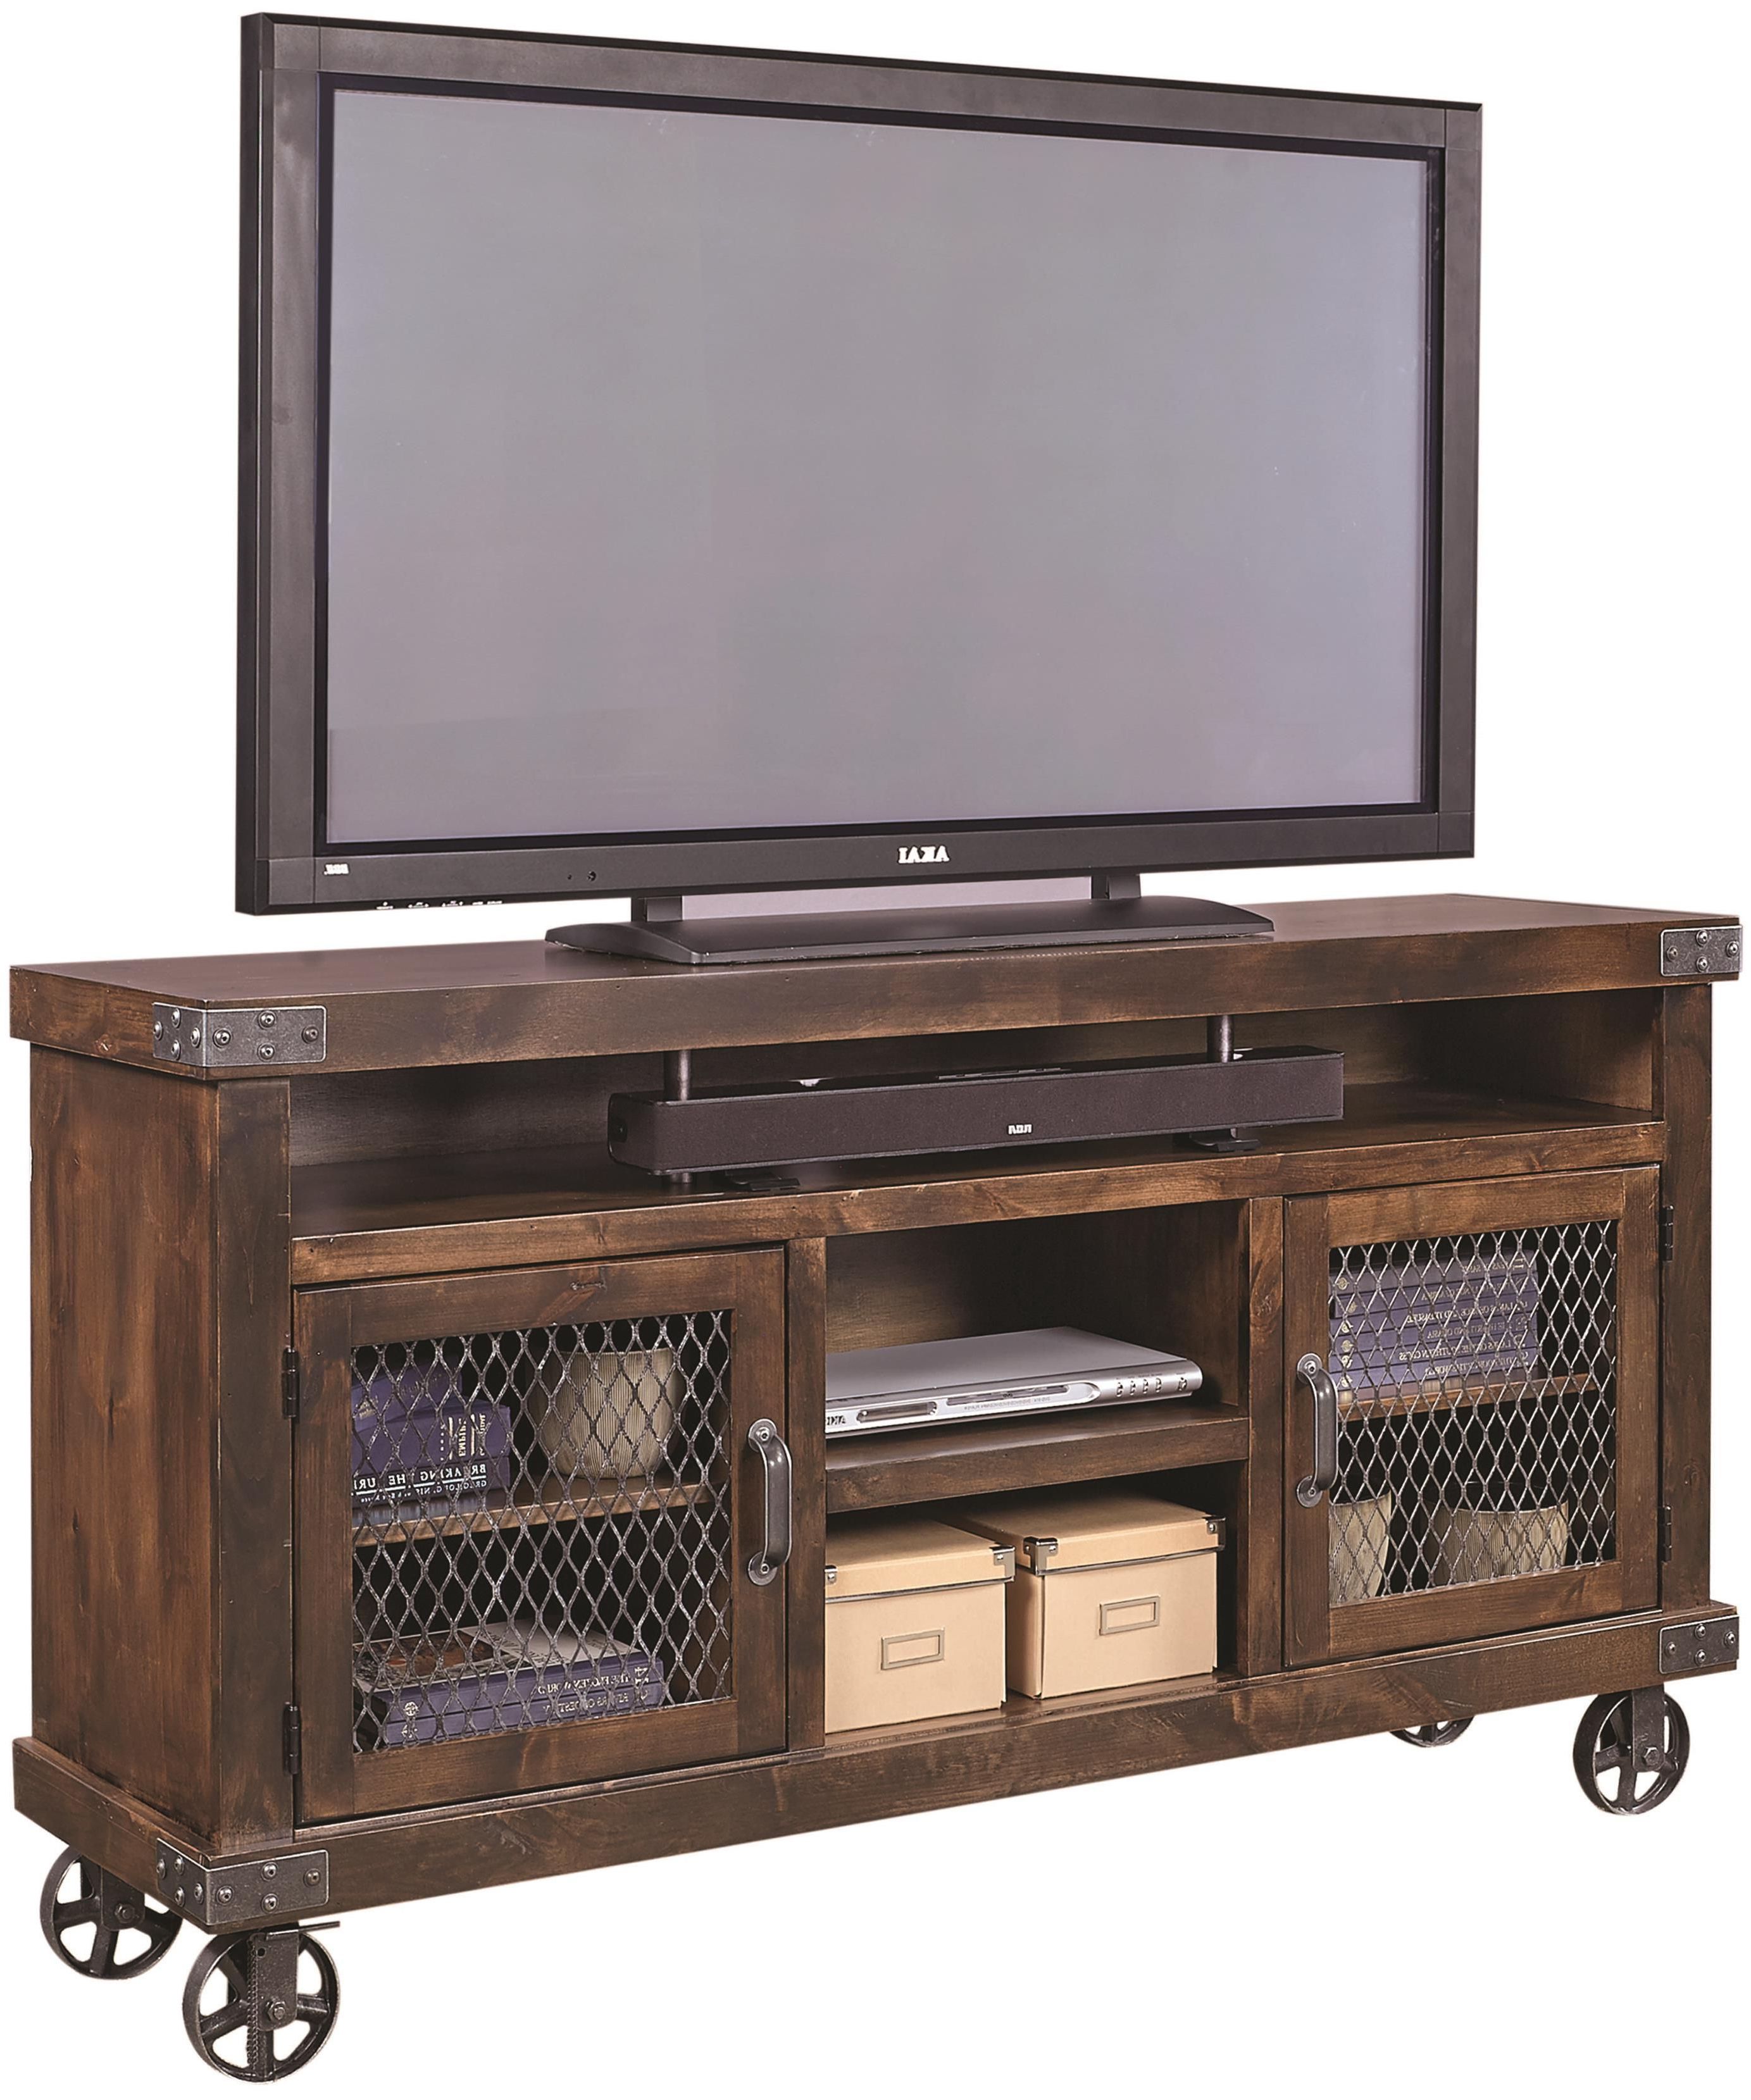 Preferred Industrial 65" Console With Metal Castersaspenhome In 2019 Regarding Rustic Tv Stands For Sale (View 12 of 20)